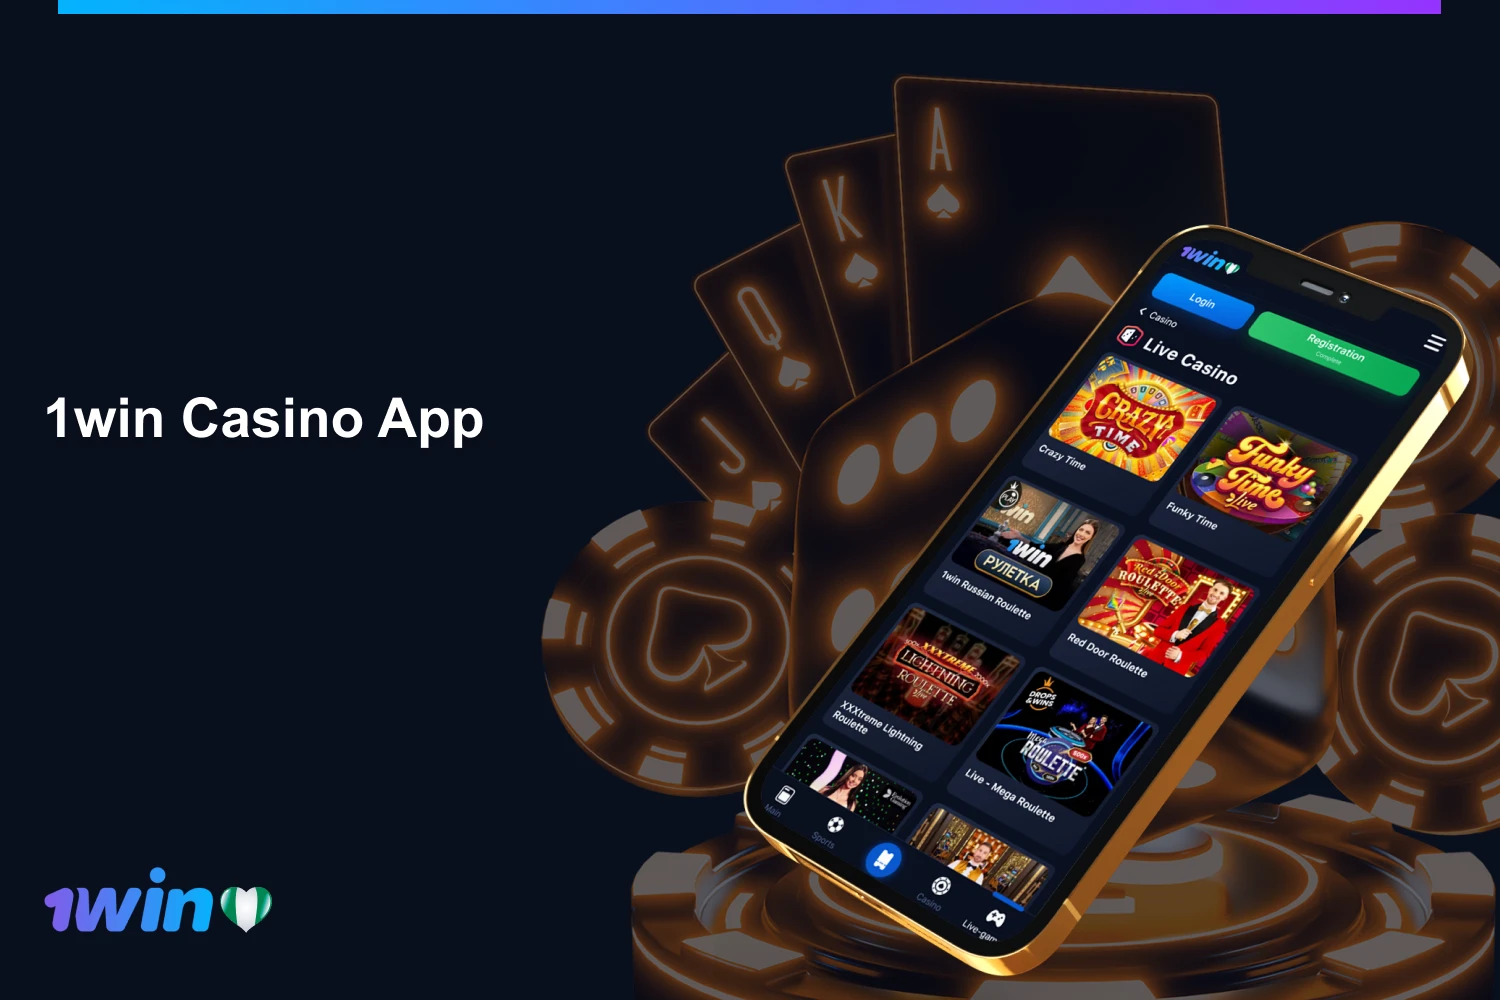 The 1win Nigeria app casino category has an extensive array of over 11,000 online games from nearly 150 providers